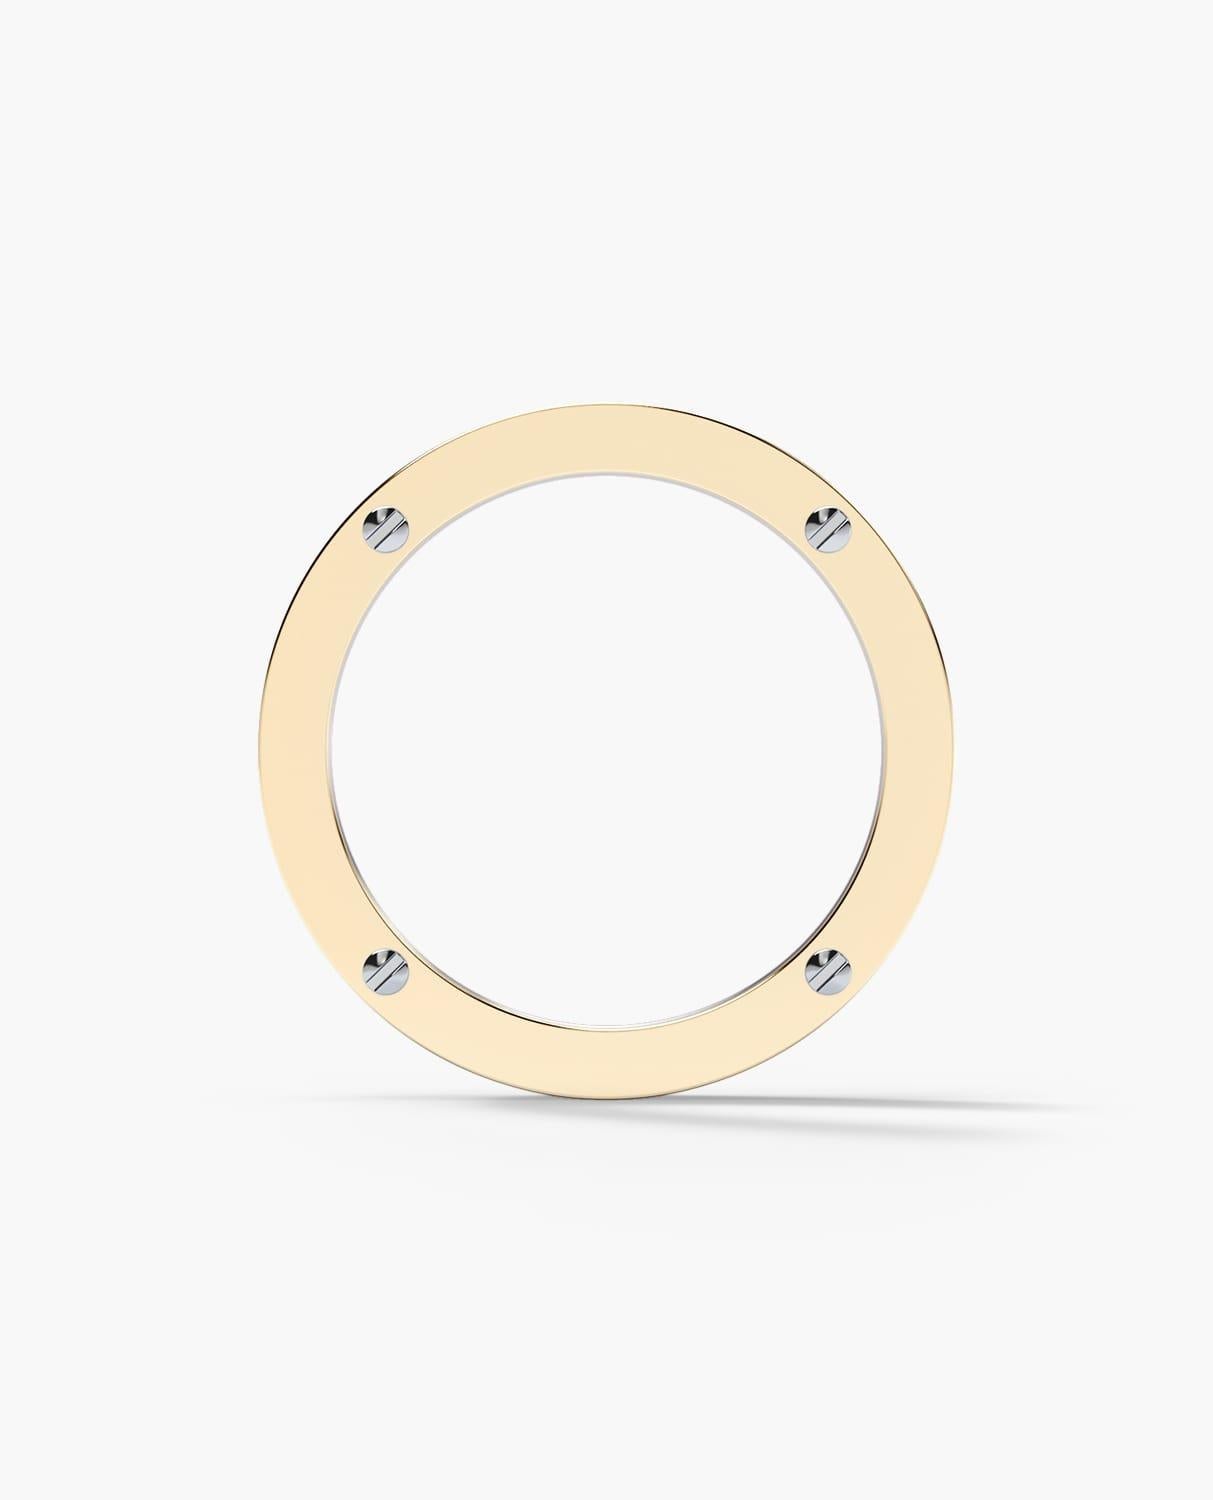 This ring has been pre-customized with Reversed Colors
Ring Width: 8 mm
Metal: 18k White & Yellow & Rose Gold
Gender: for Men and Women

Three bold looking bands connected by signature exclusive Rockford screws give this design a very bold, modern,